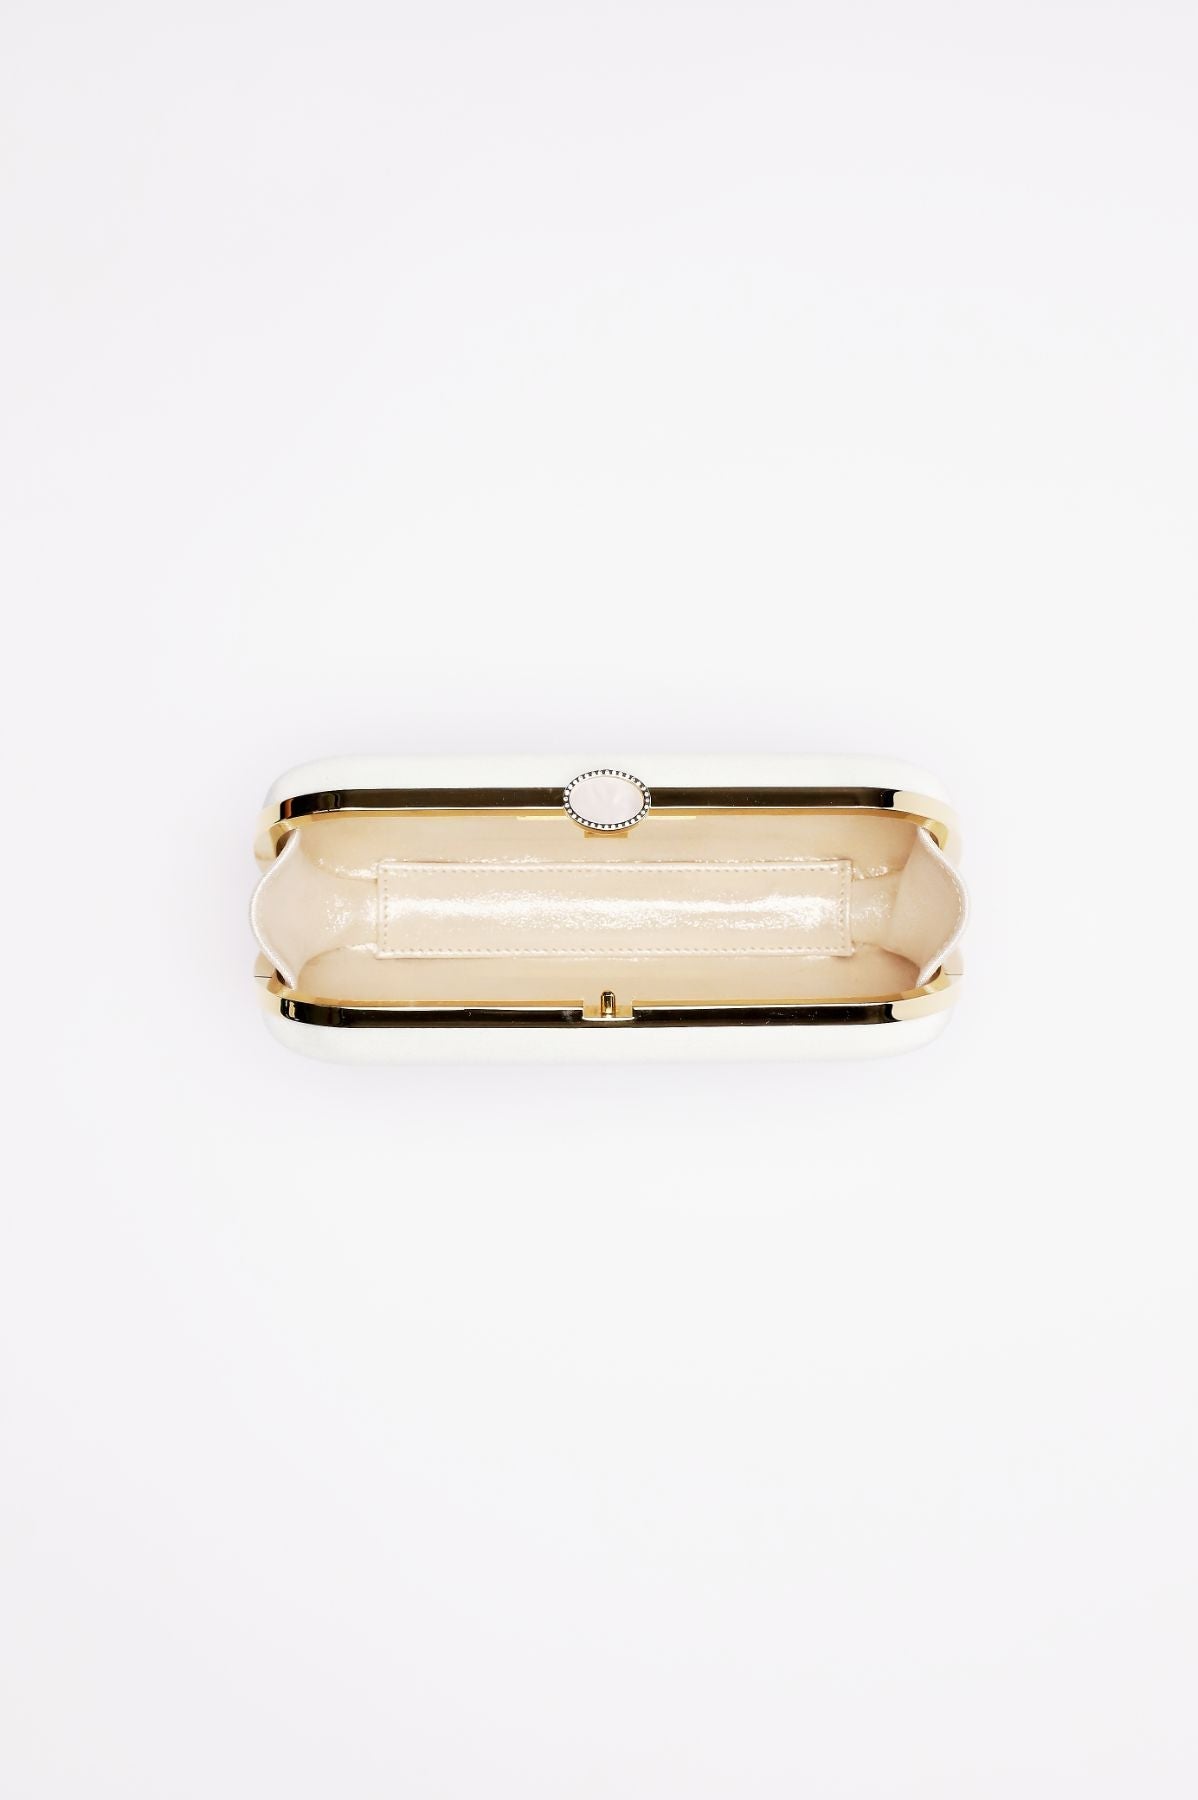 An open, empty Bella Rosa Collection Bella Clutch Sage Green Satin Petitie purse on a white background.